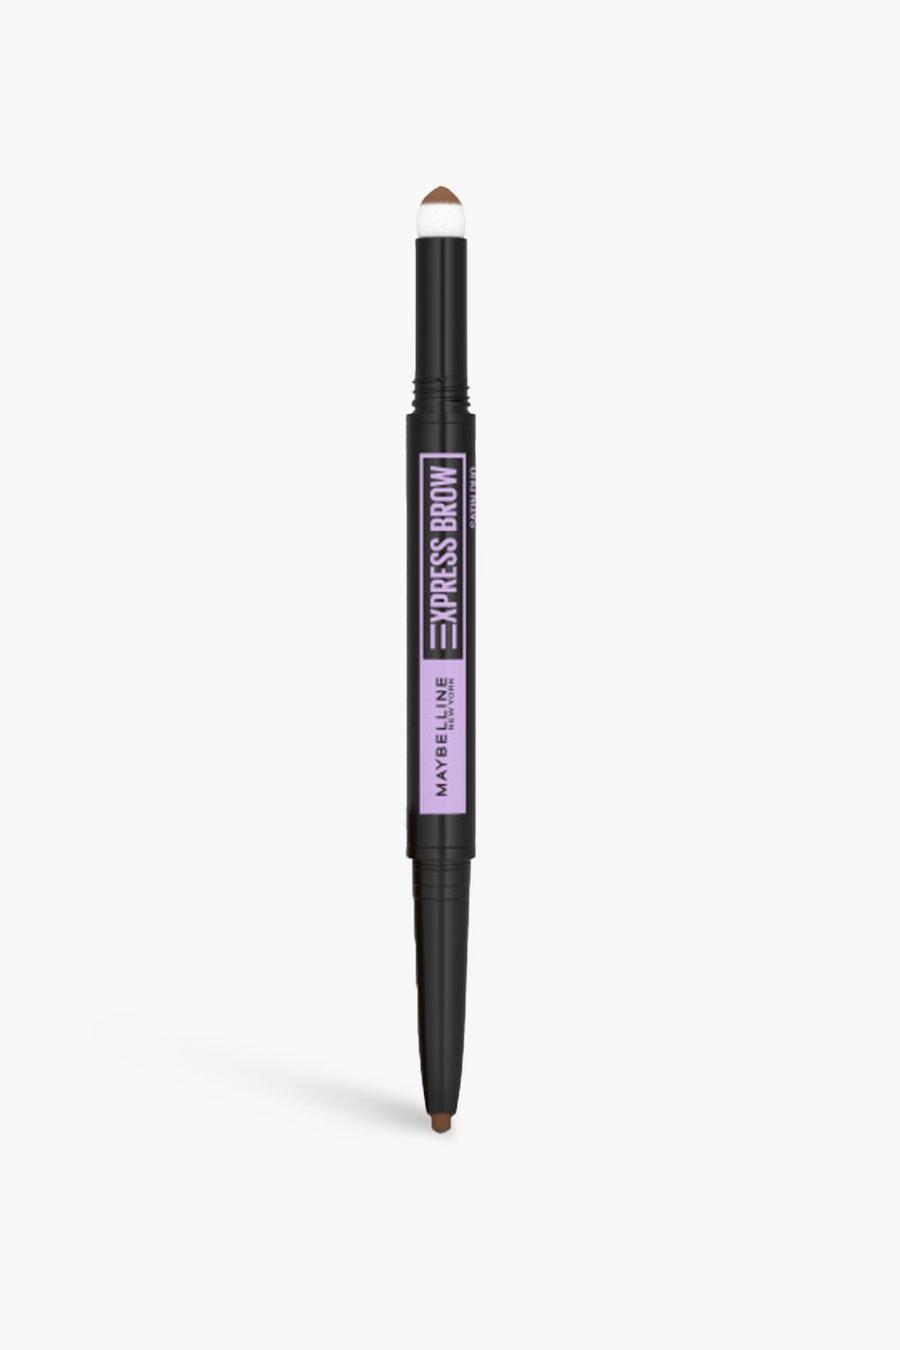 Maybelline - Crayon à sourcil - Express Brow Duo, 02 brunette